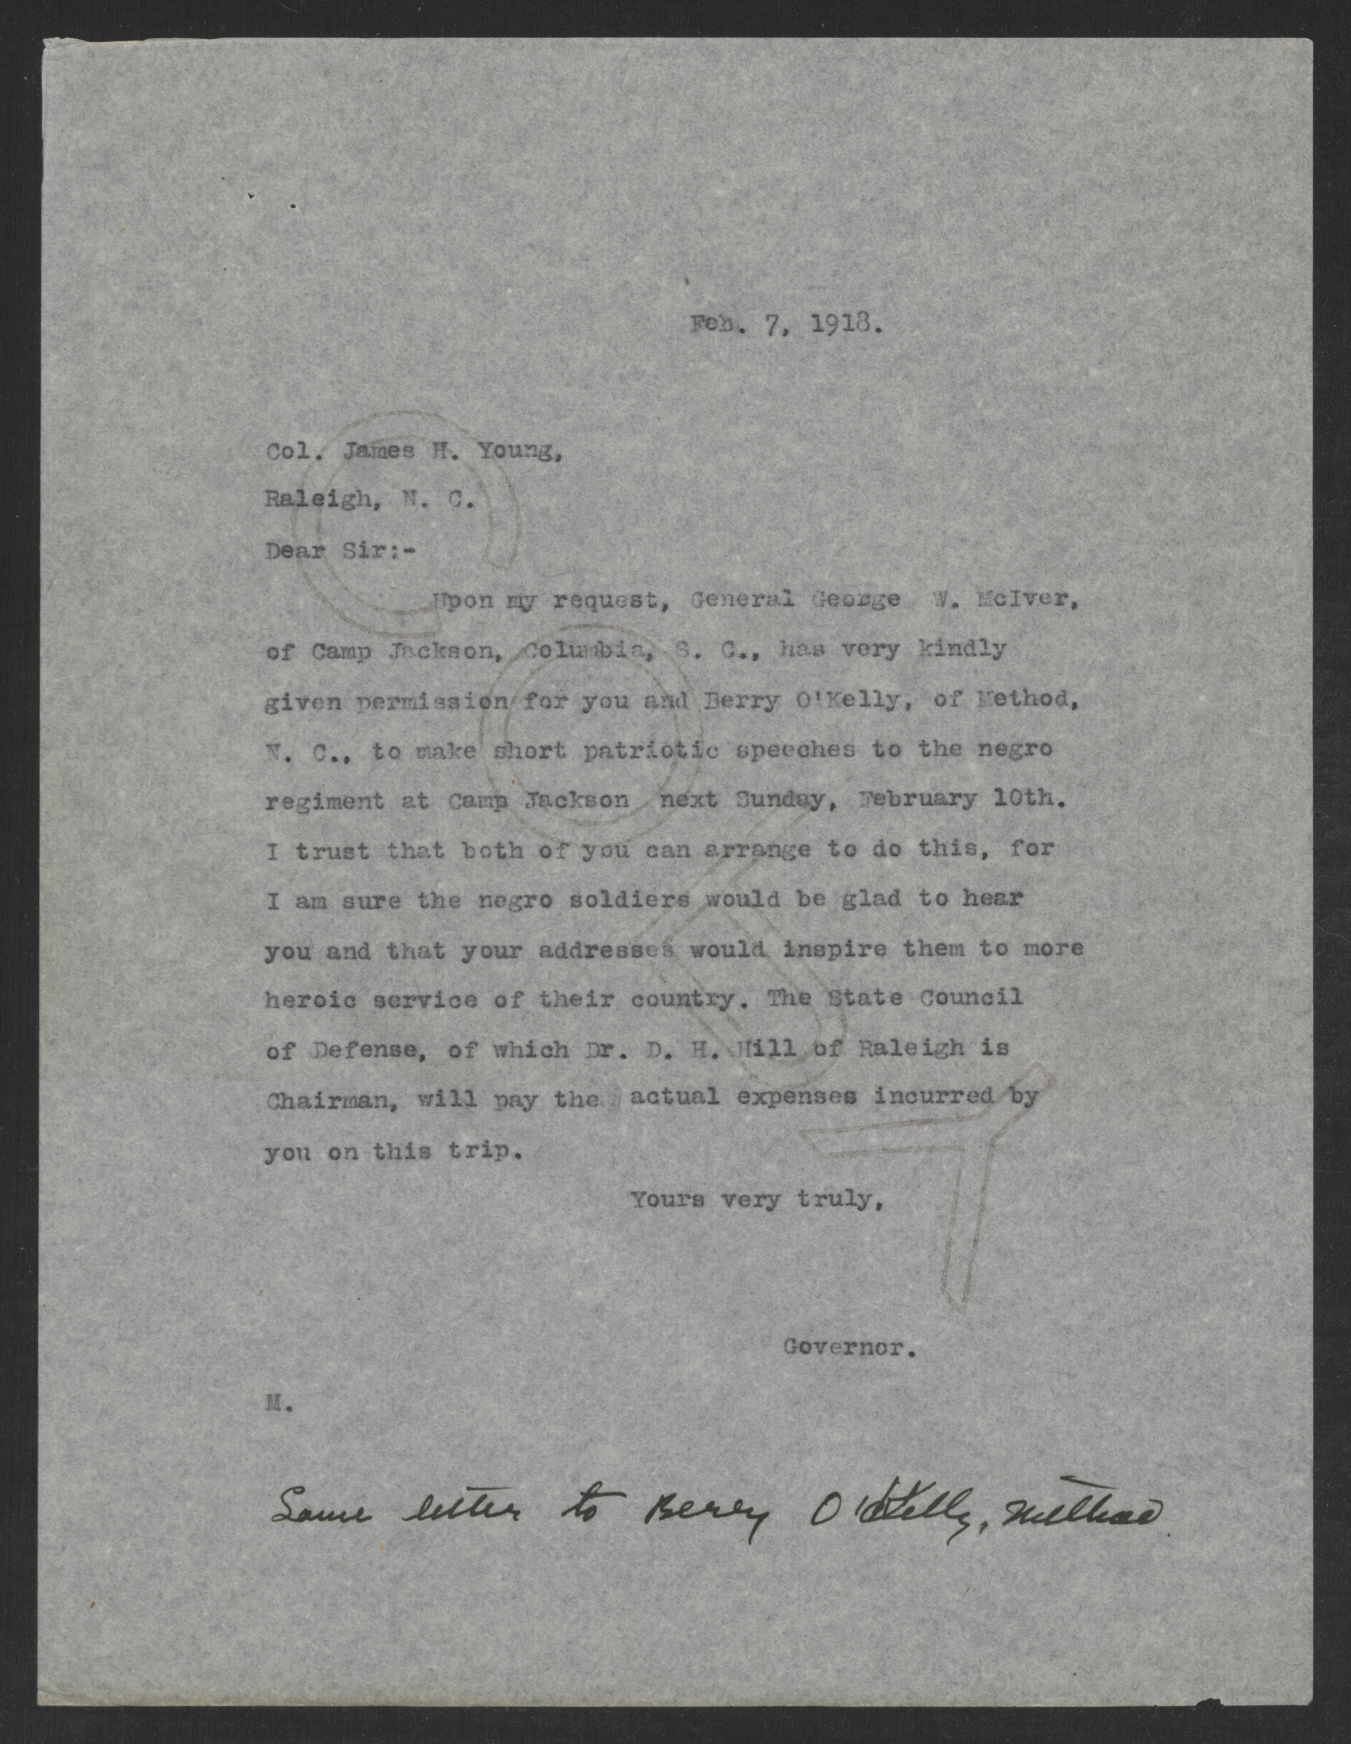 Letter from Gov. Bickett to James H. Young, February 7, 1918